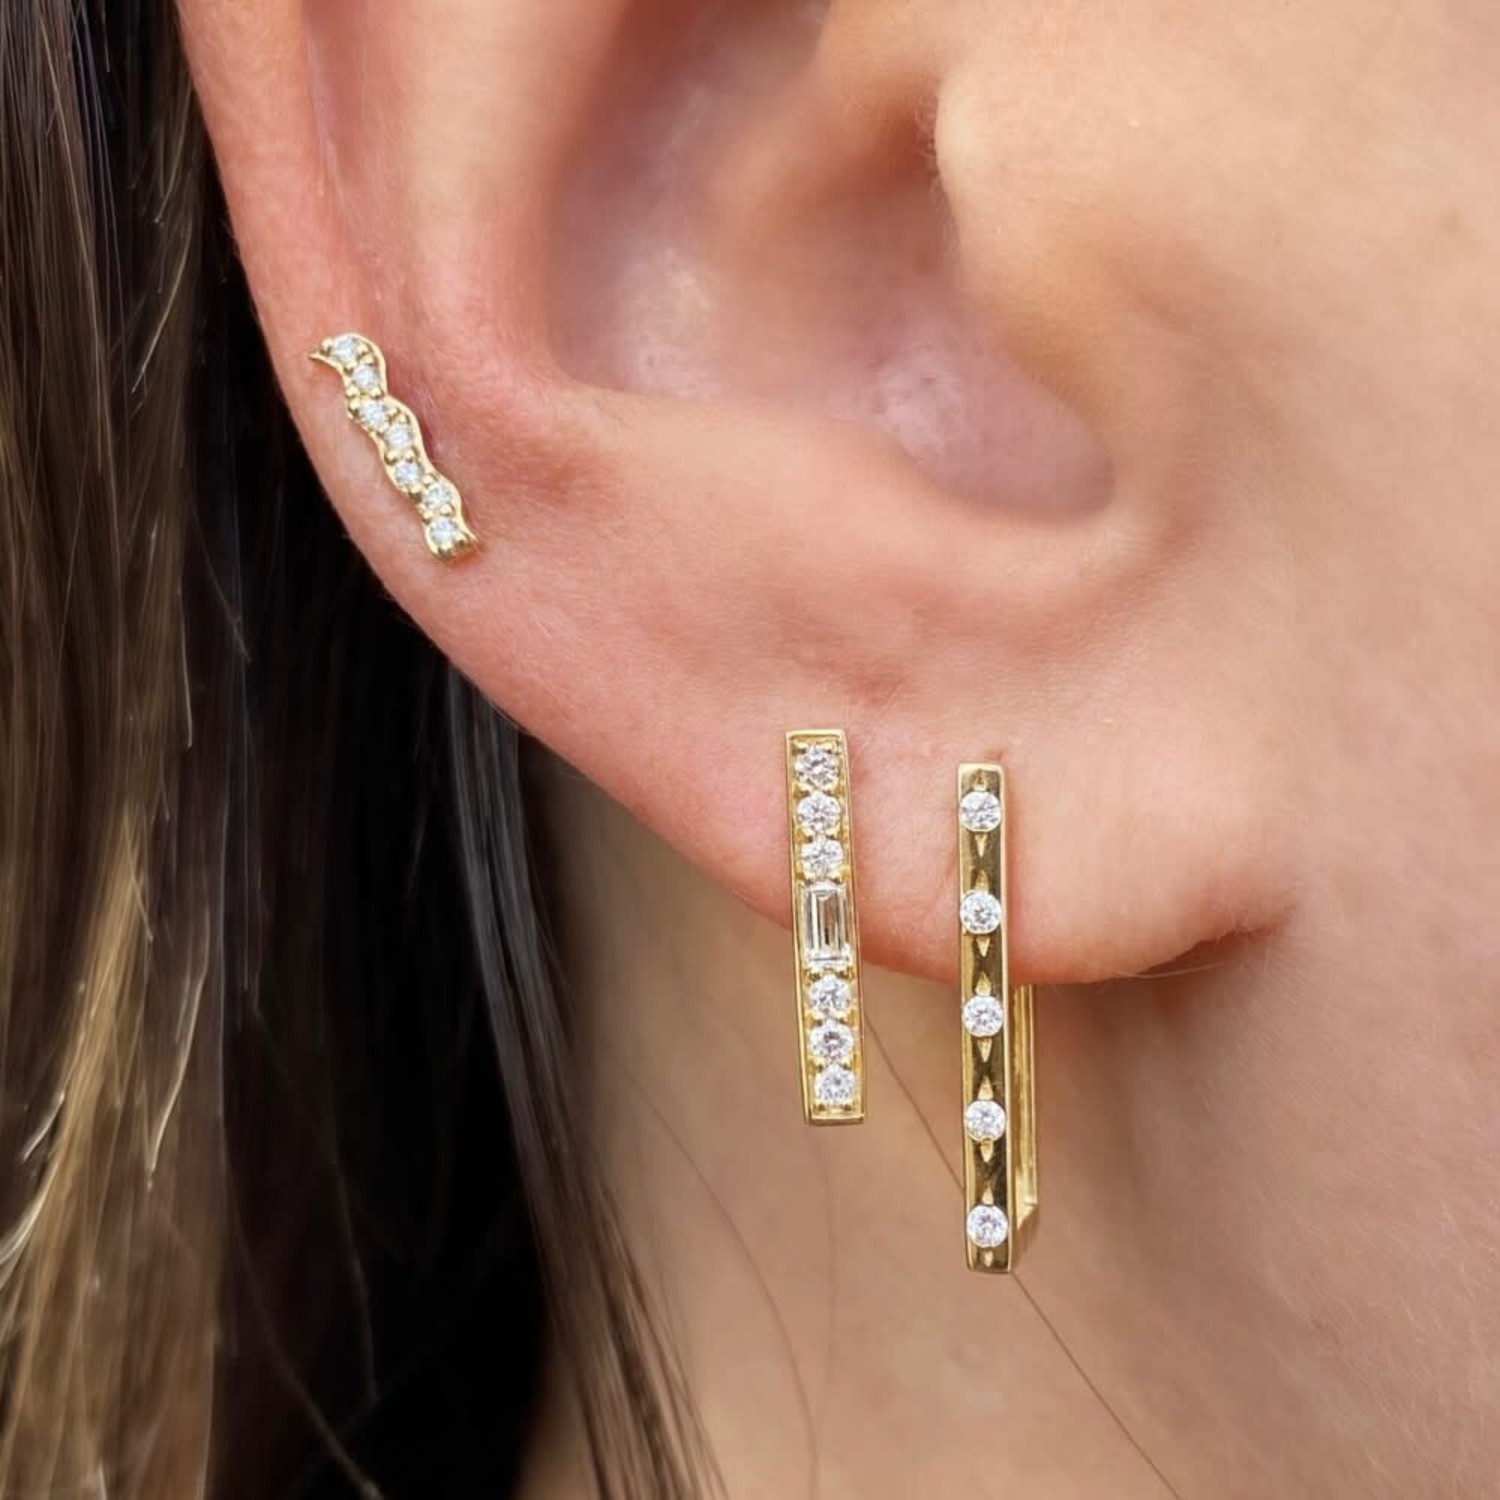 Discover more than 193 three hoop earrings super hot